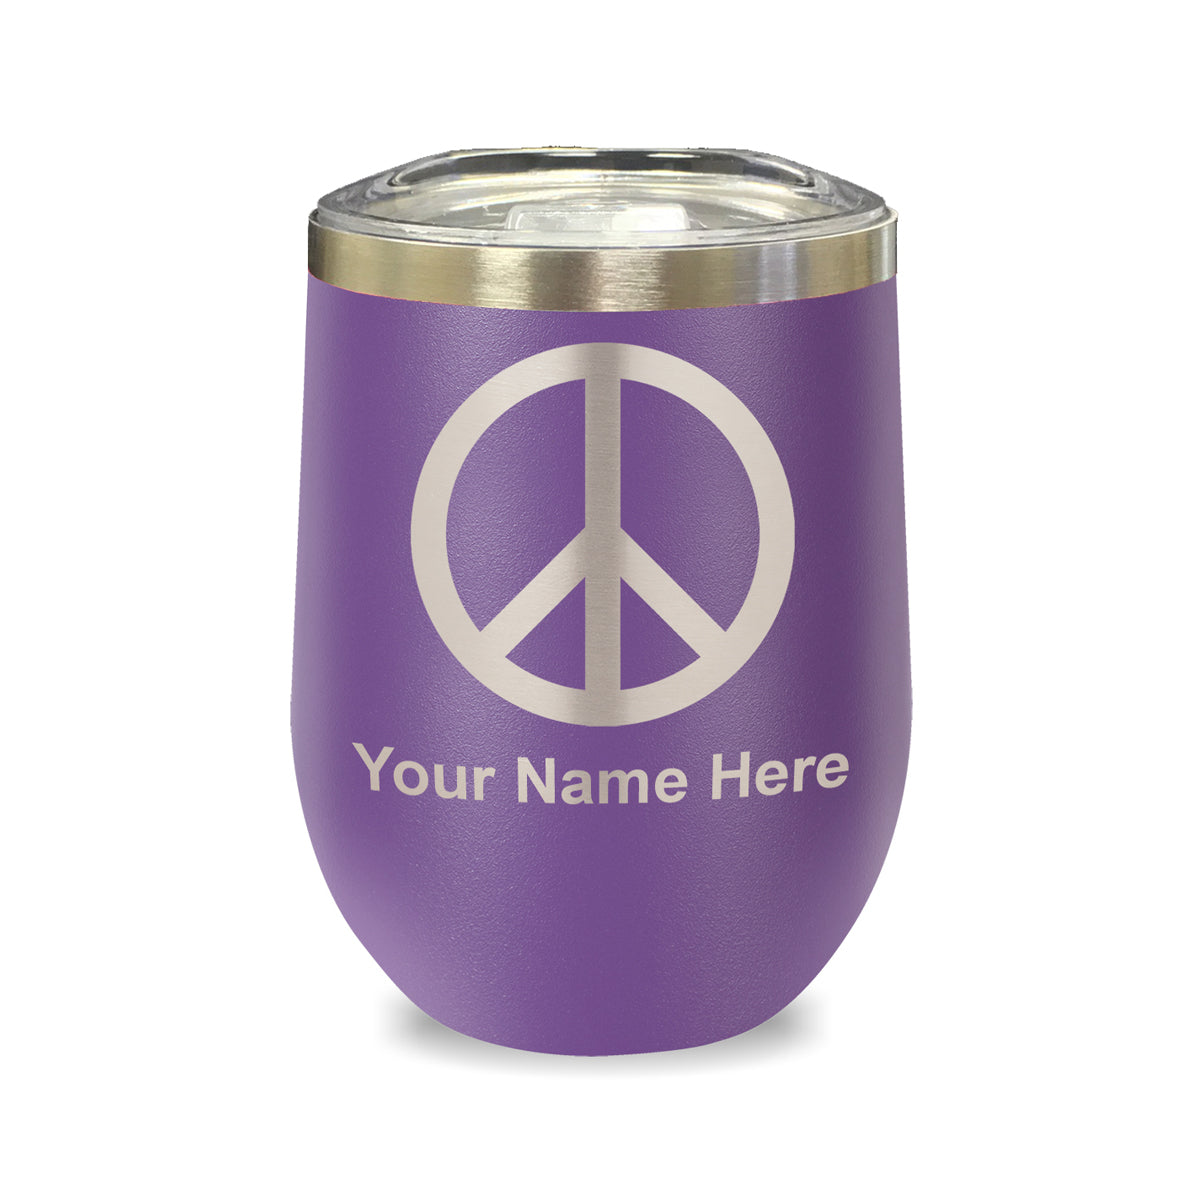 LaserGram Double Wall Stainless Steel Wine Glass, Peace Sign, Personalized Engraving Included